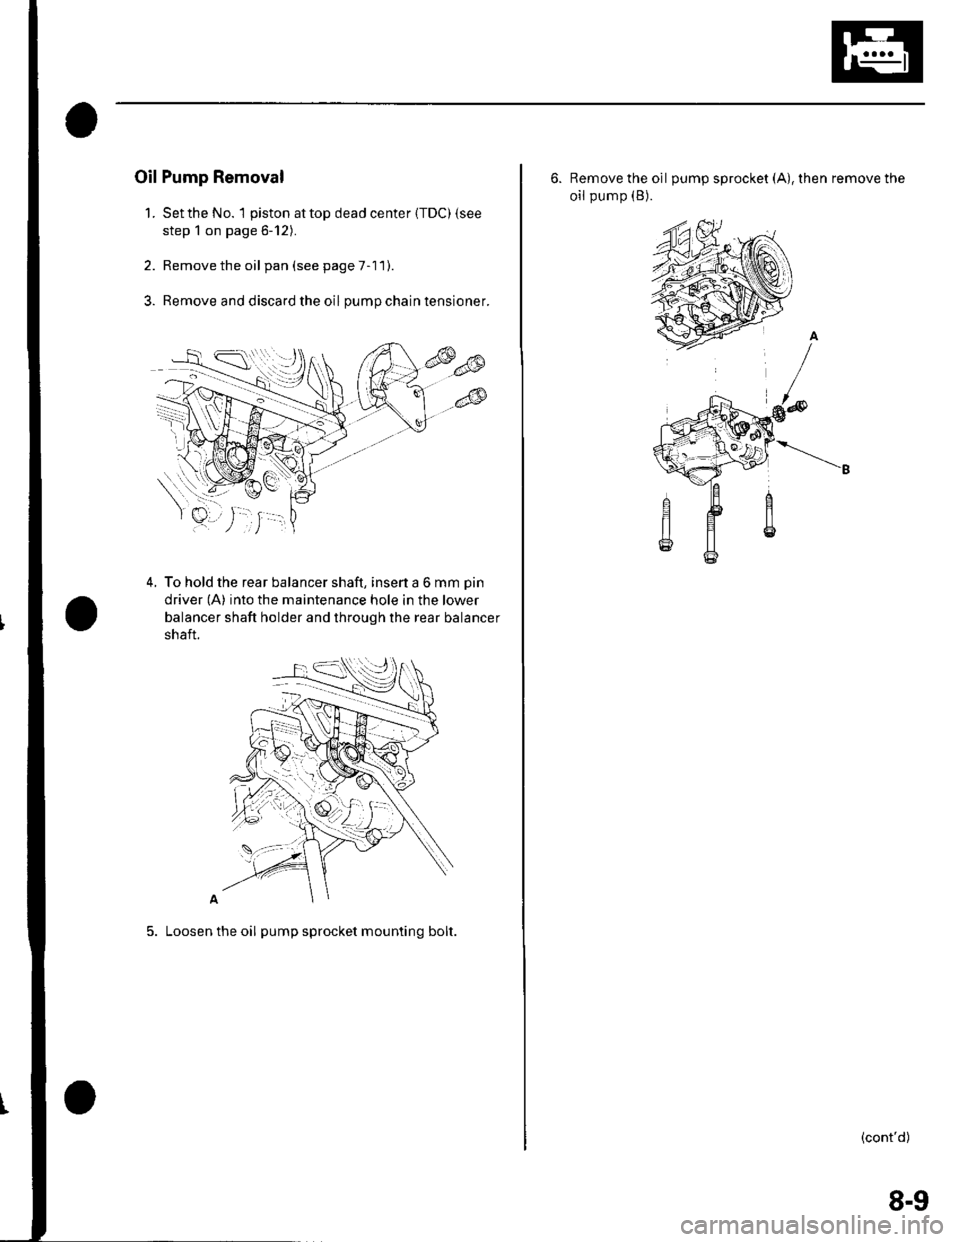 HONDA CIVIC 2003 7.G Workshop Manual Oil Pump Removal
1. Setthe No. 1 piston attop dead center {TDC) {see
step 1 on page 6-12).
2. Remove the oil pan(seepageT-11).
3. Remove and discard the oil pumpchaintensioner.
4. To hold the rear bal